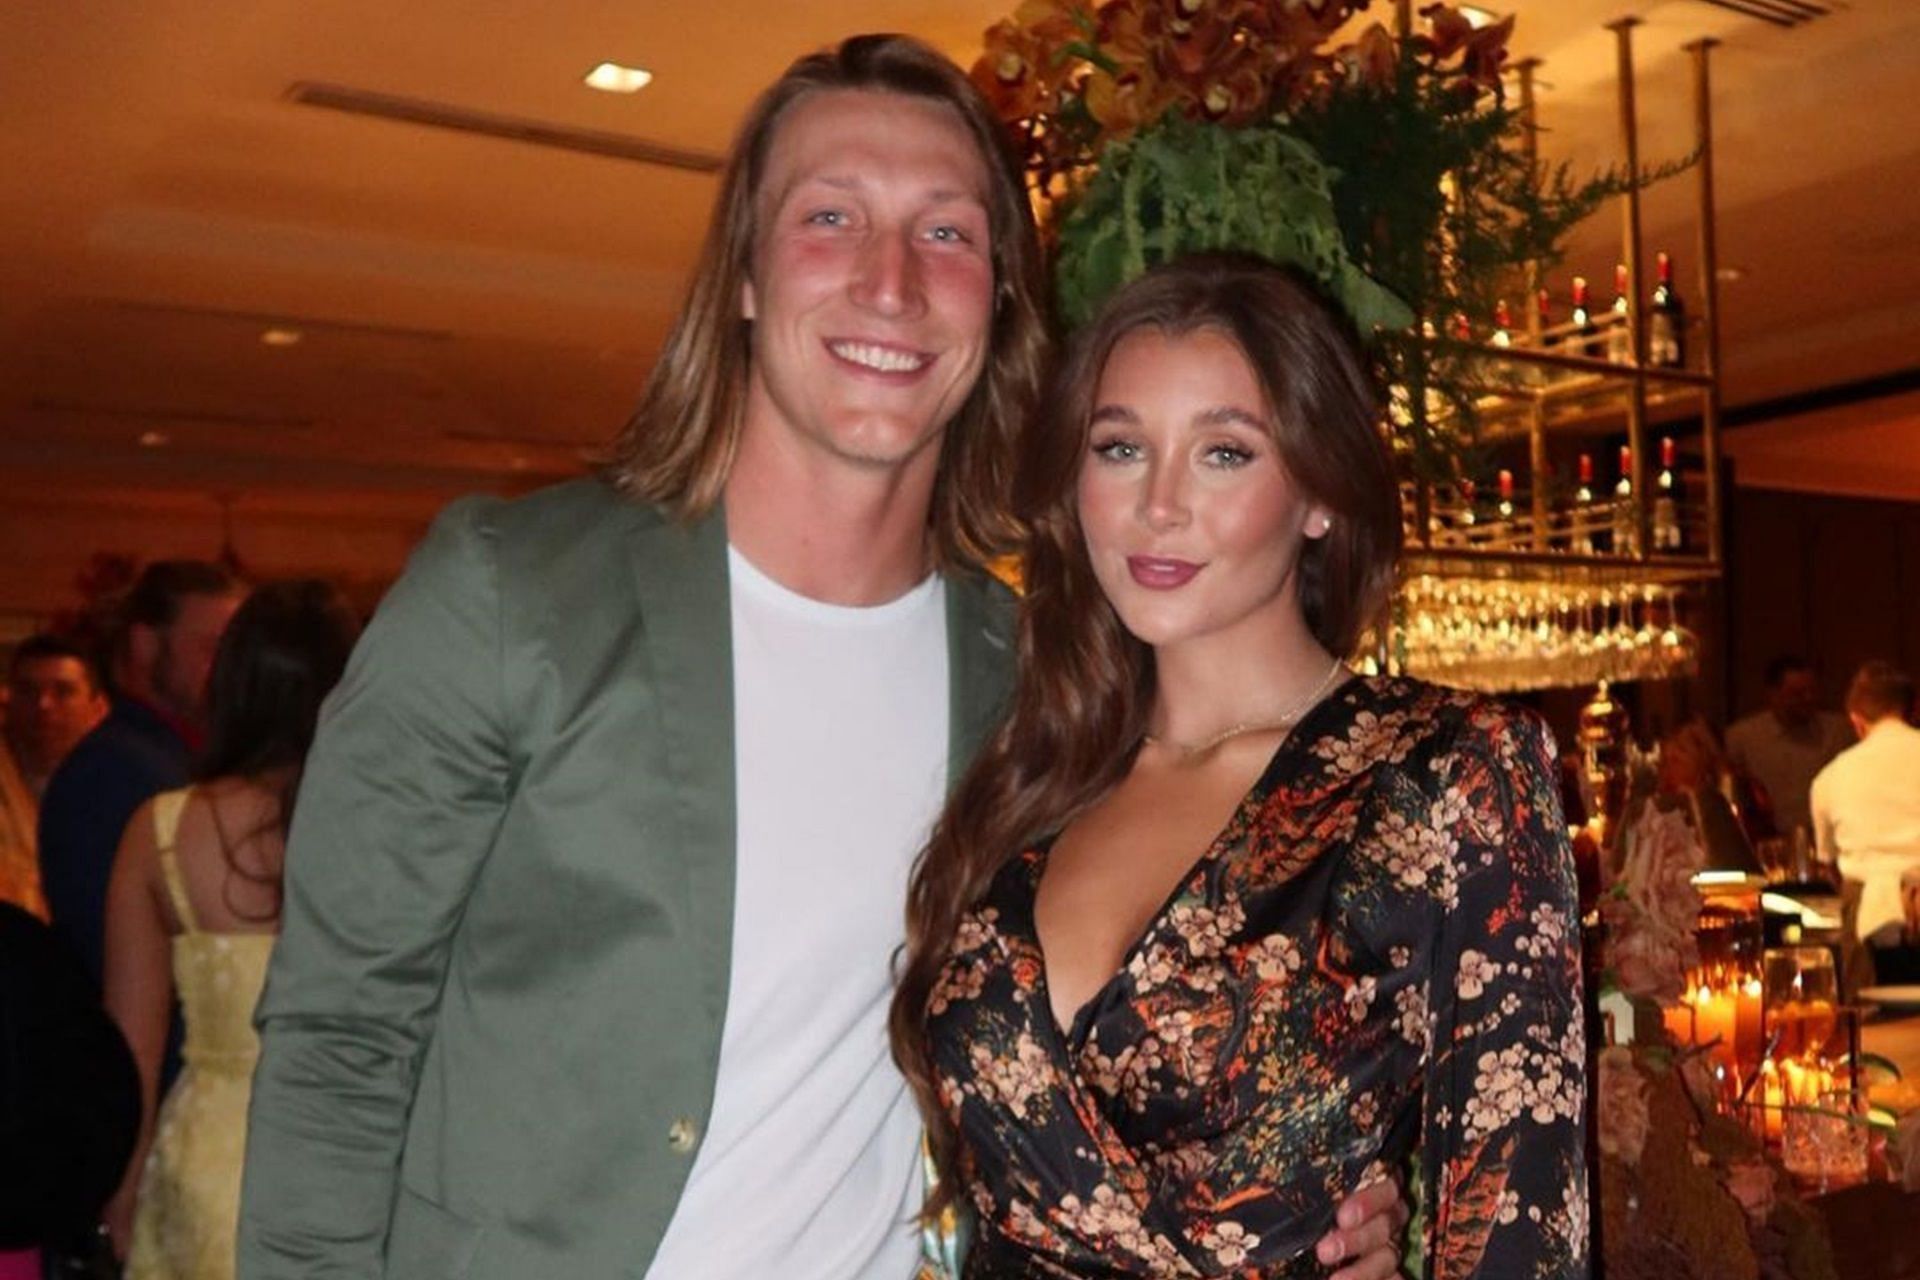 Trevor Lawrence, wife Melissa stun in chic outfits at friend